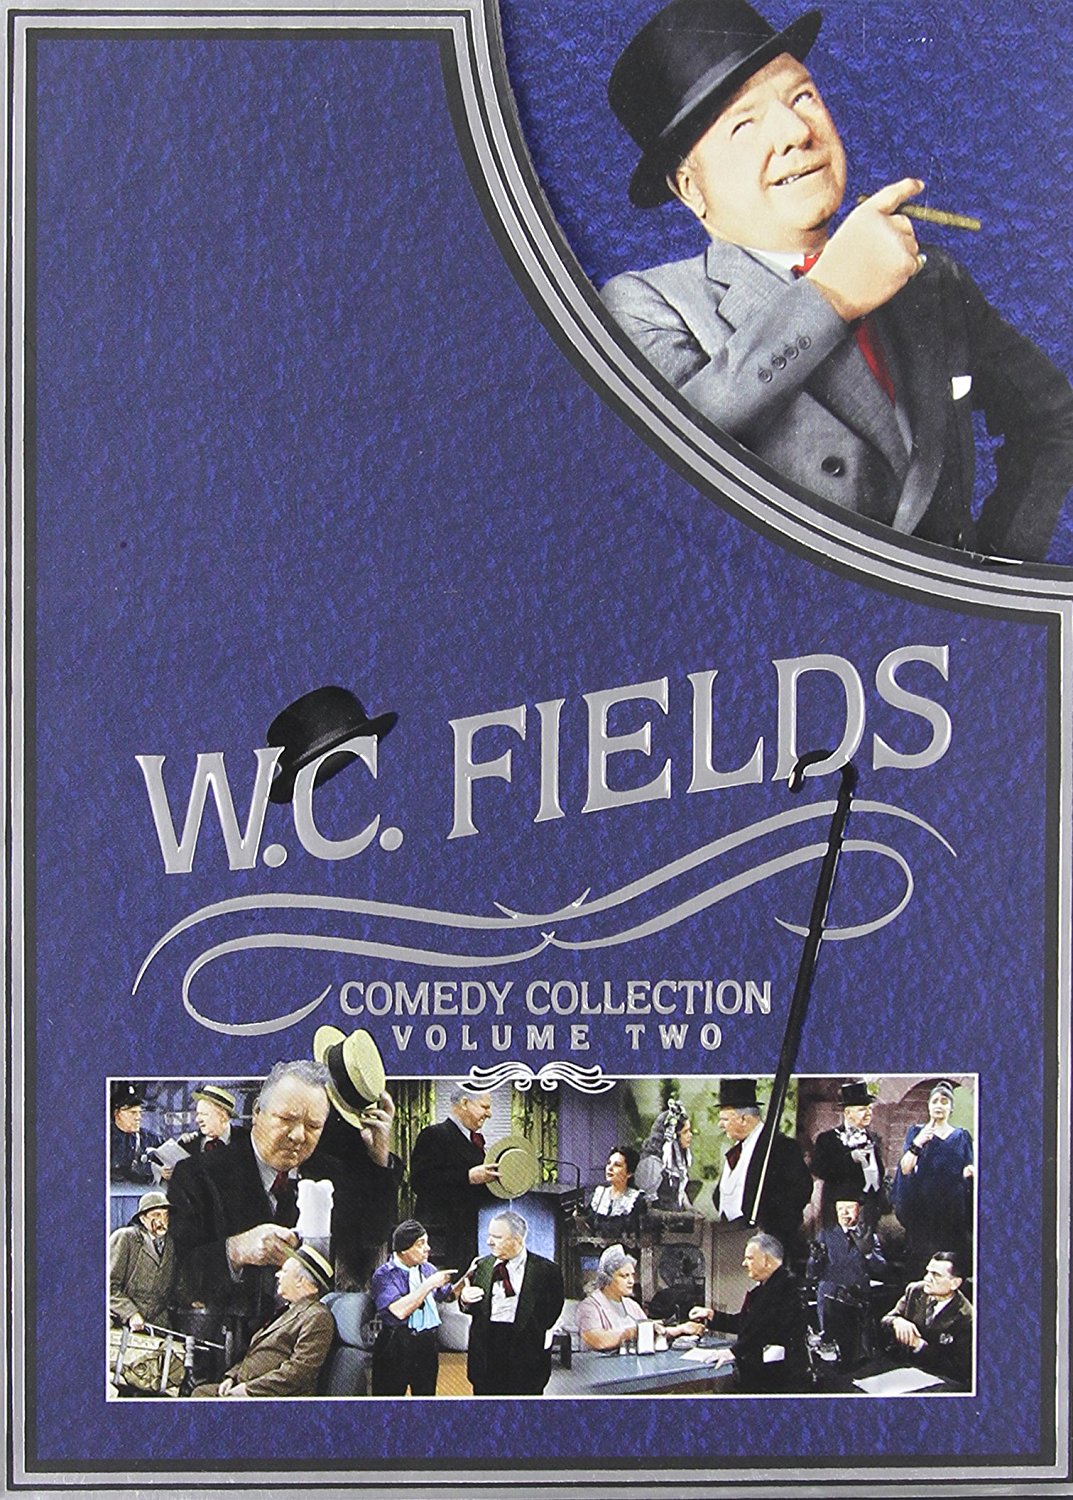 W.C. Fields Comedy Collection, Vol. 2 (The Man on the Flying Trapeze / Never Give A Sucker An Even Break / You're Telling Me! / The Old Fashioned Way / Poppy)